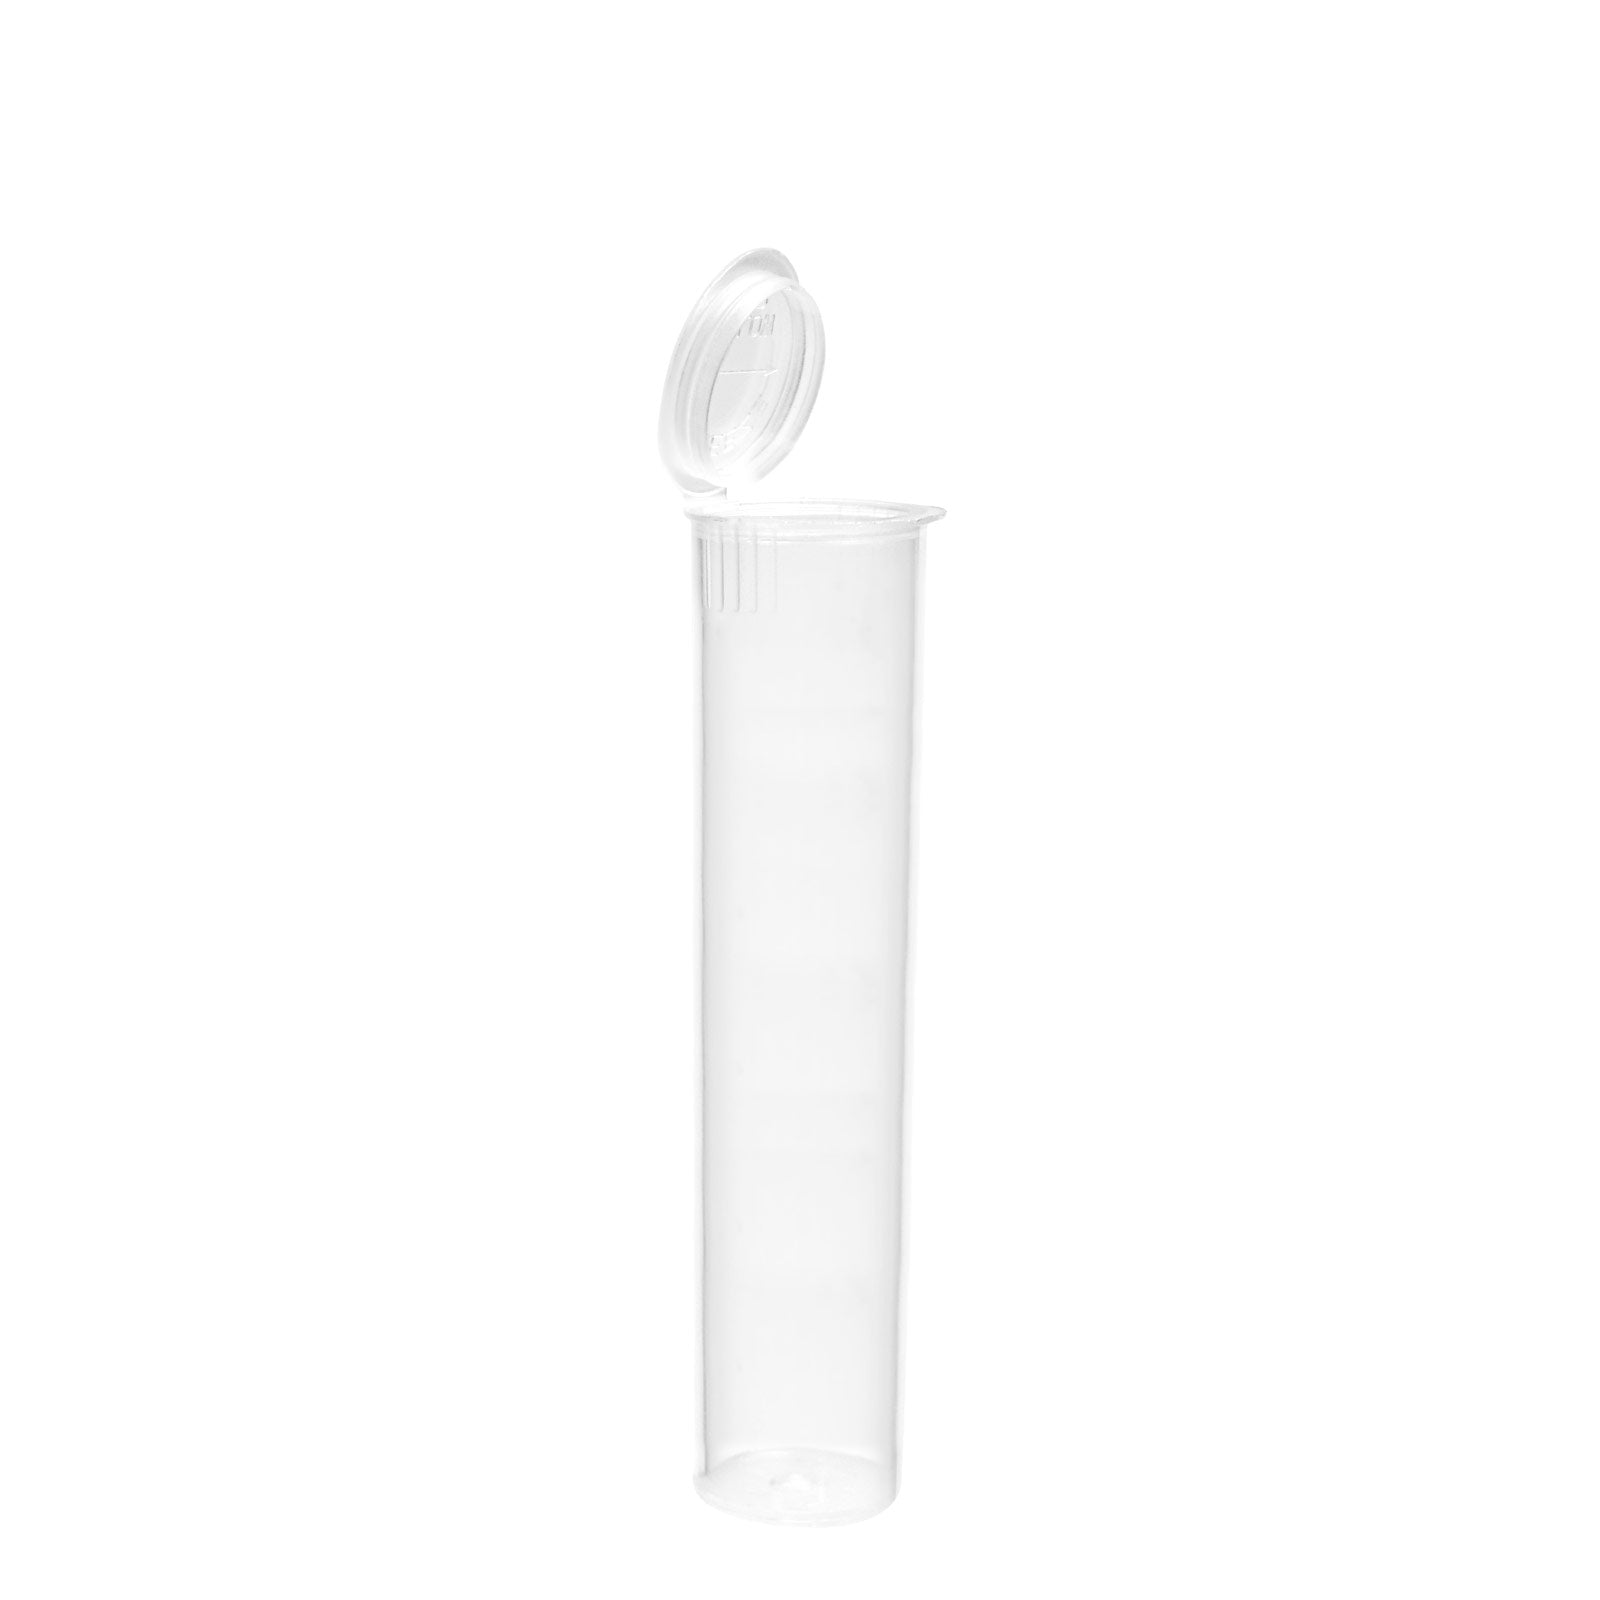 98mm Rx Squeeze Tubes Translucent Clear - 700 Count